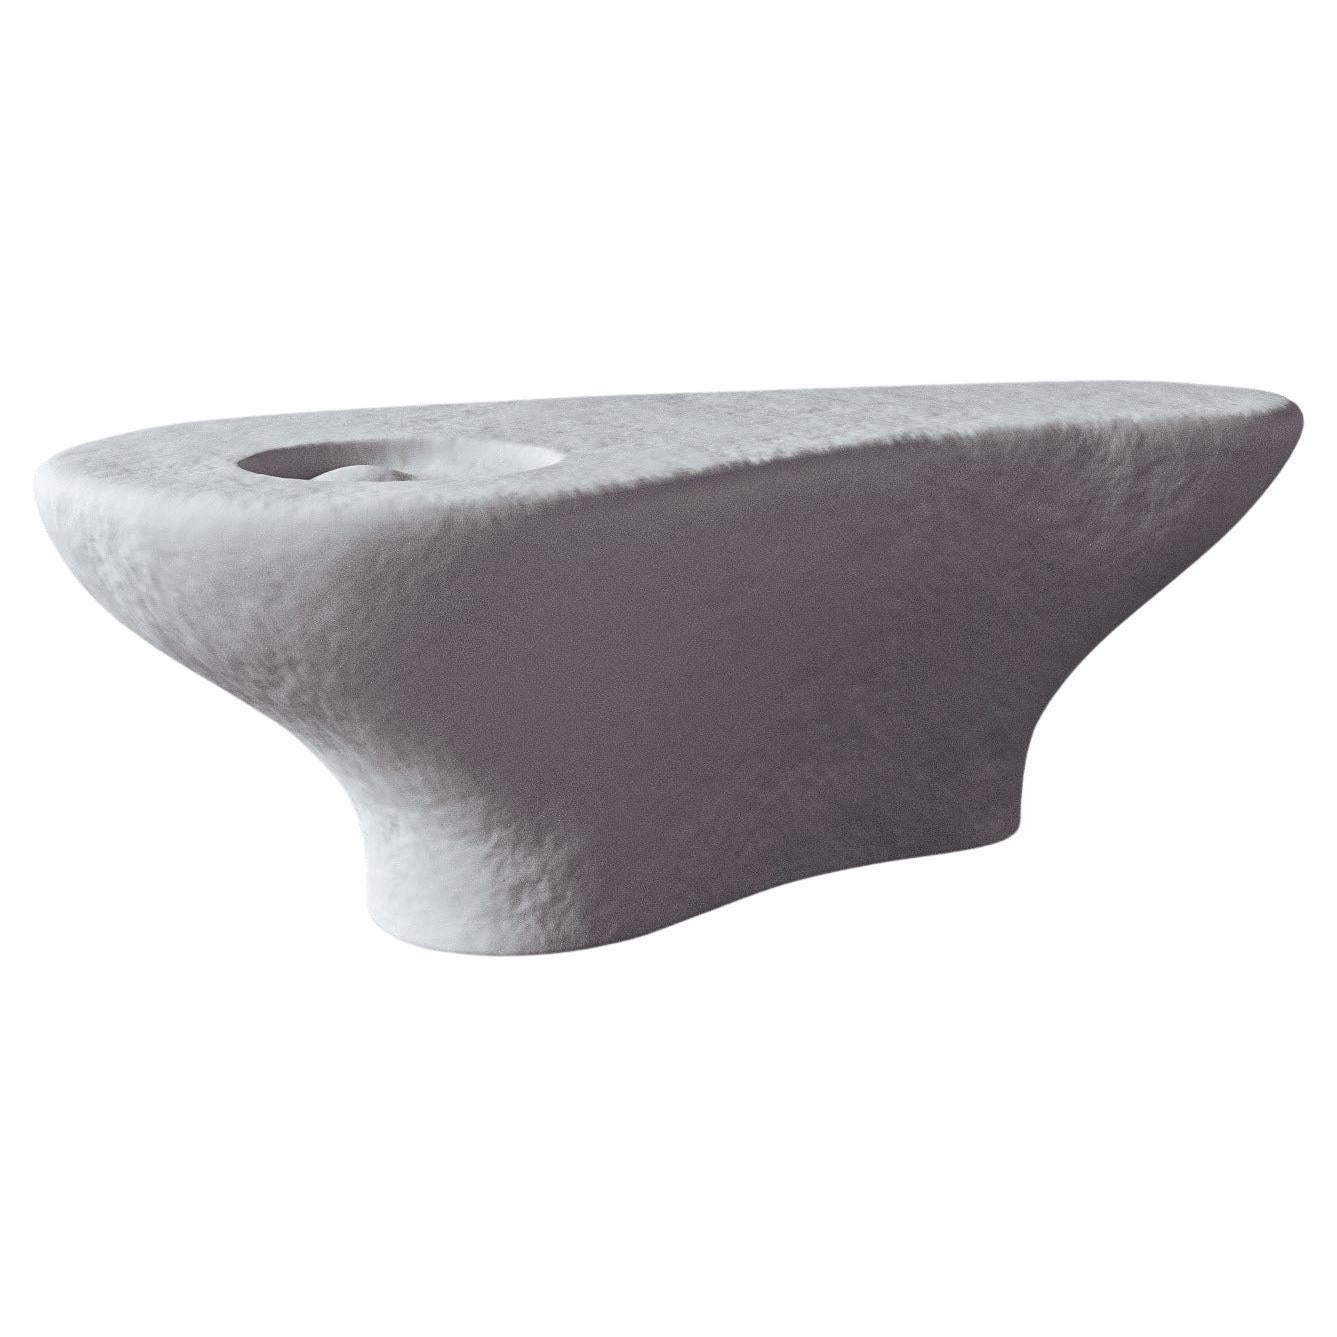 "Vence" Organic, Hand-Sculpted Plaster Accent Table by Christiane Lemieux For Sale